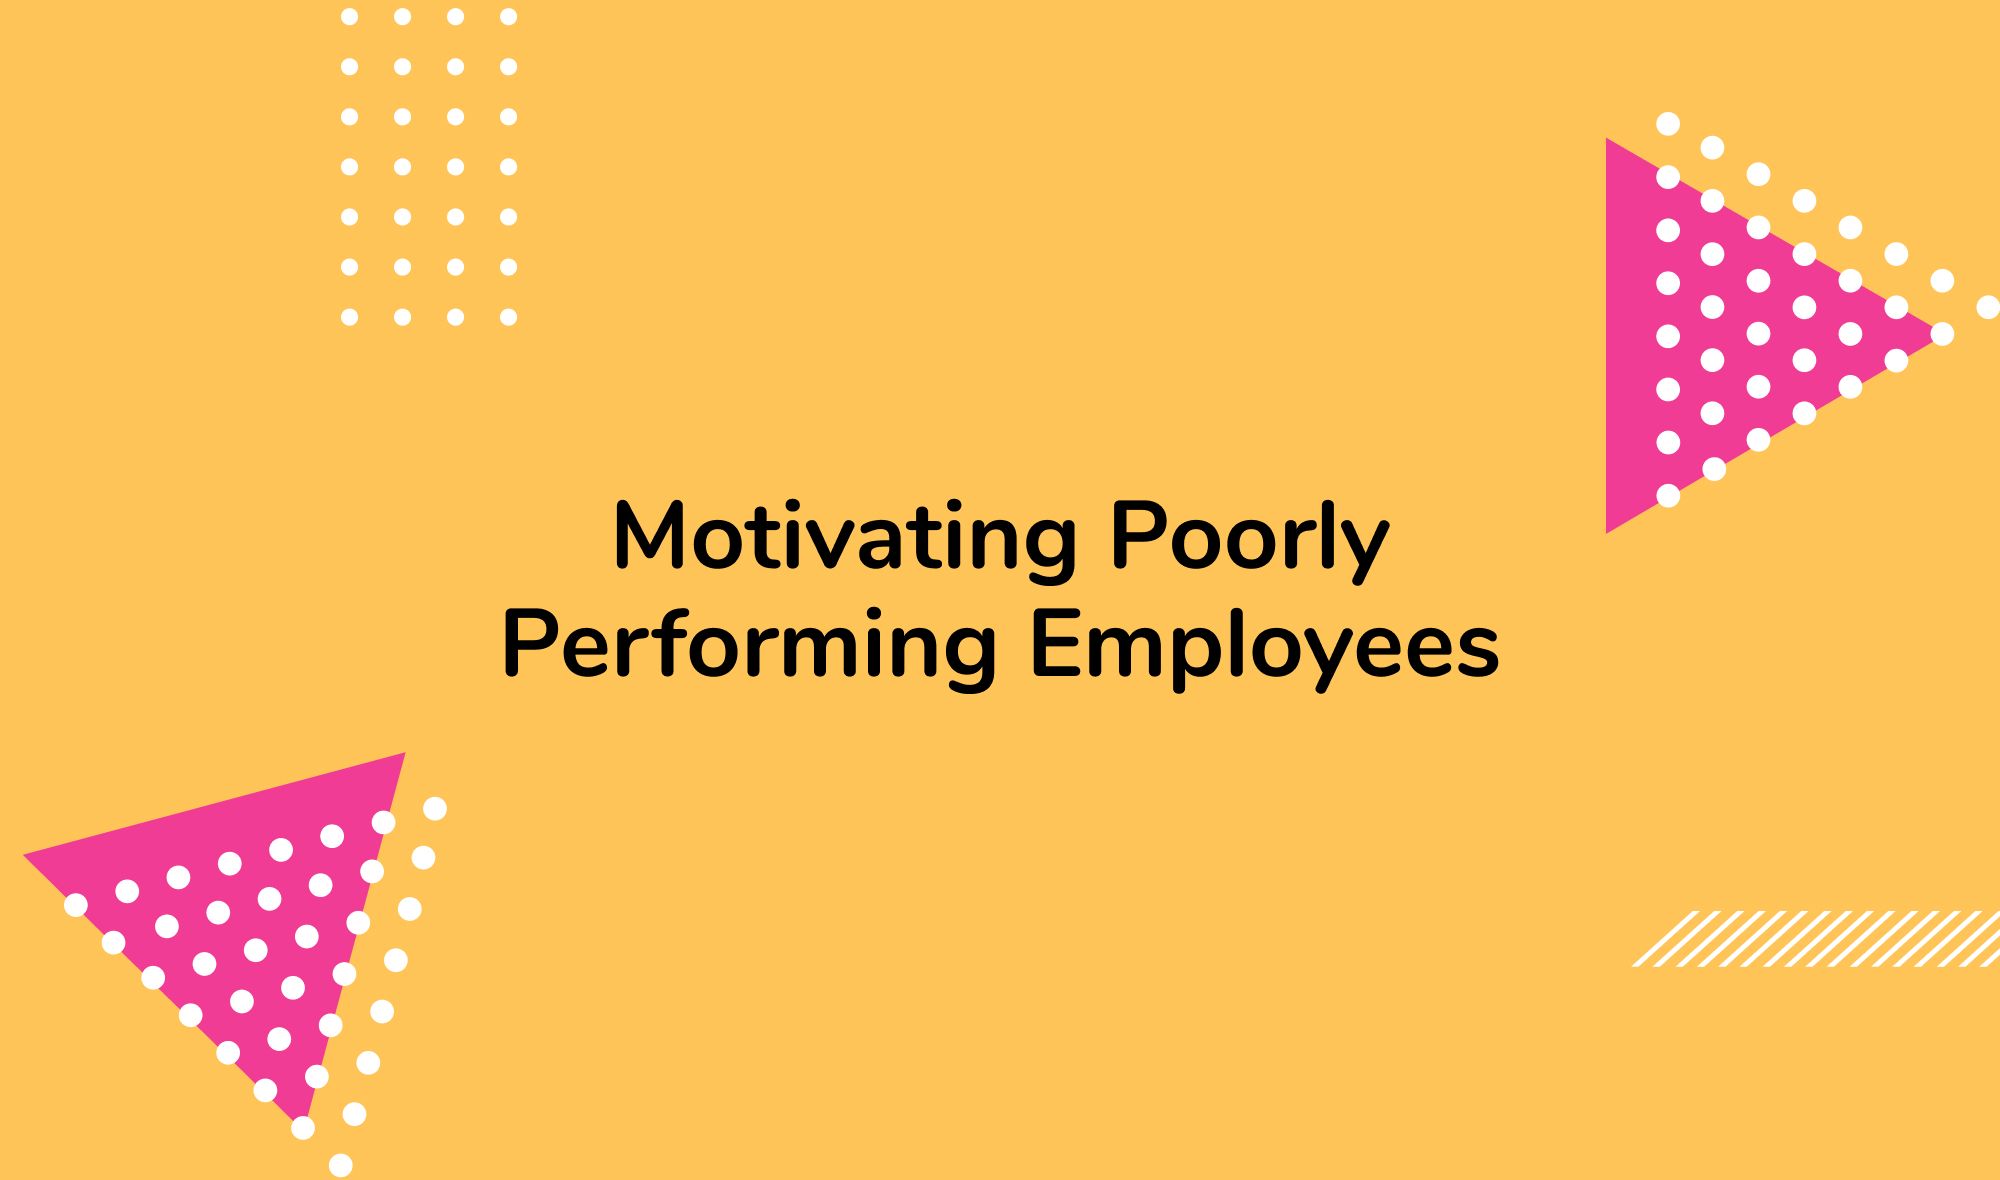 Motivating Poorly Performing Employees